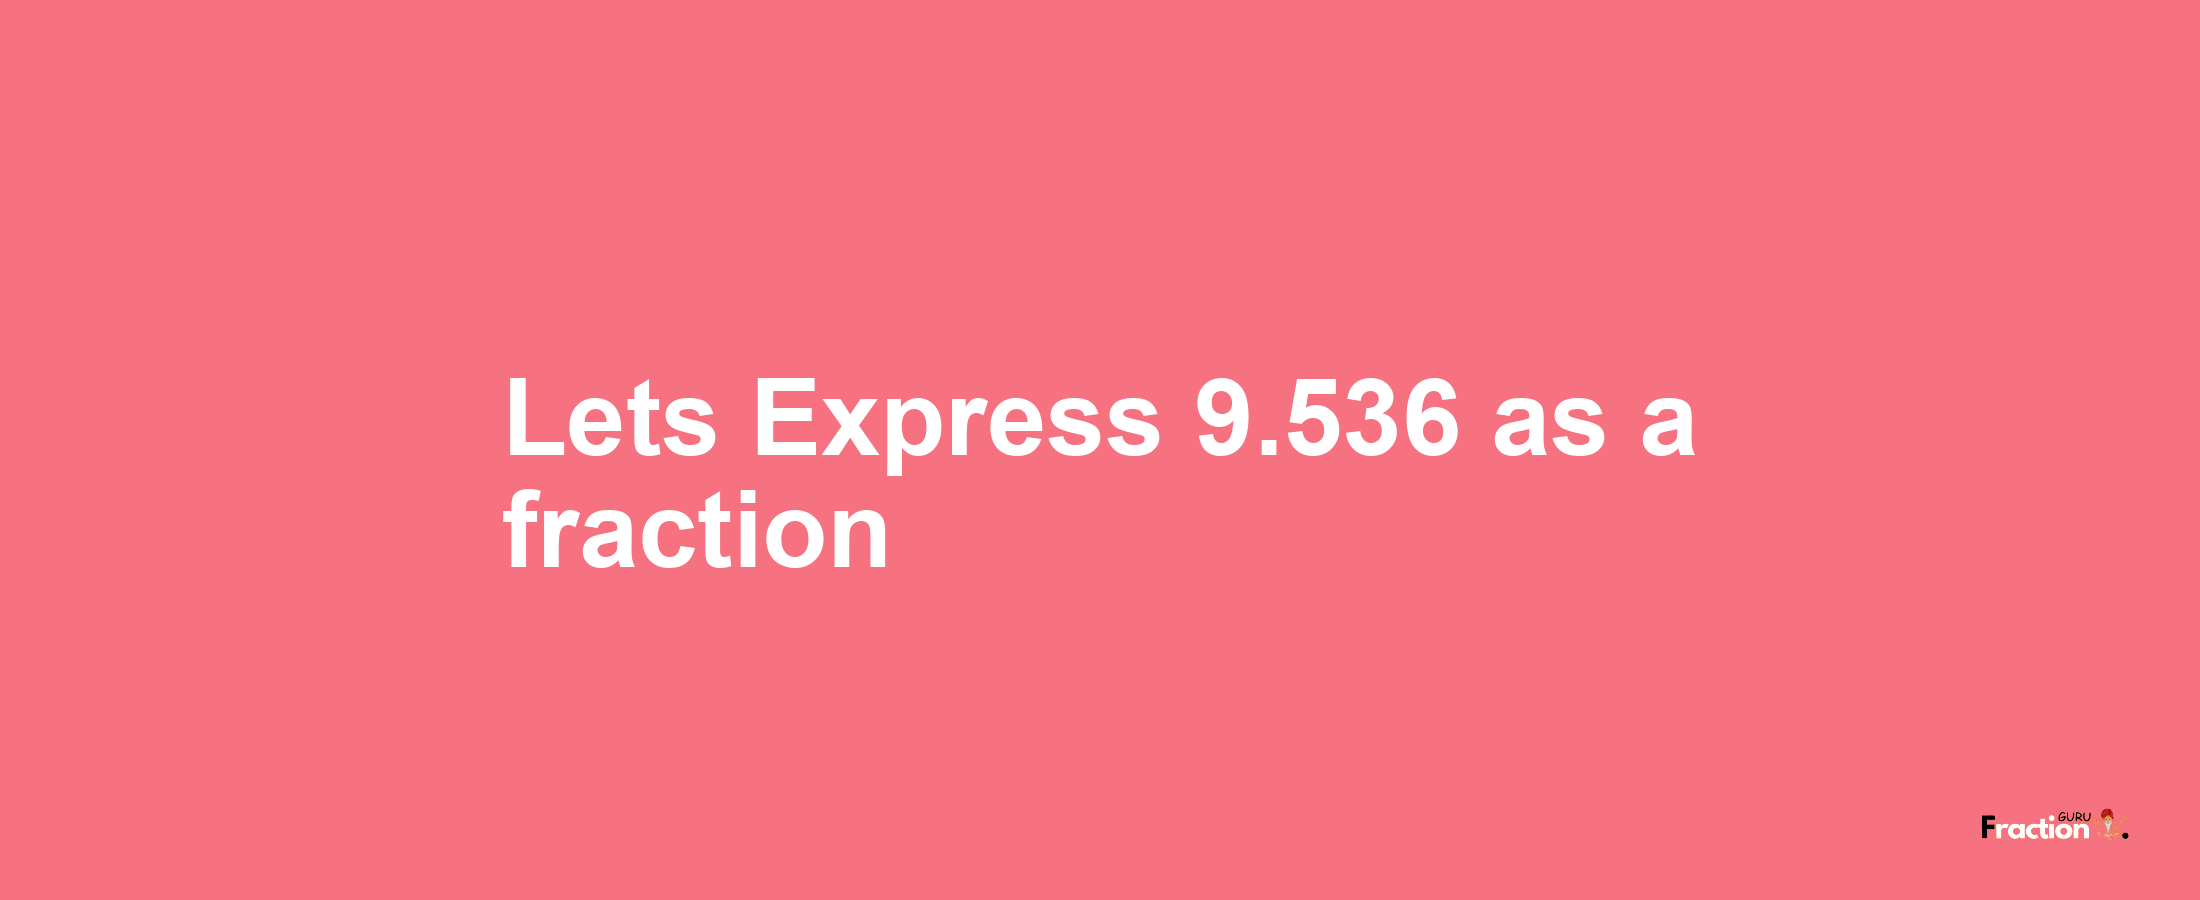 Lets Express 9.536 as afraction